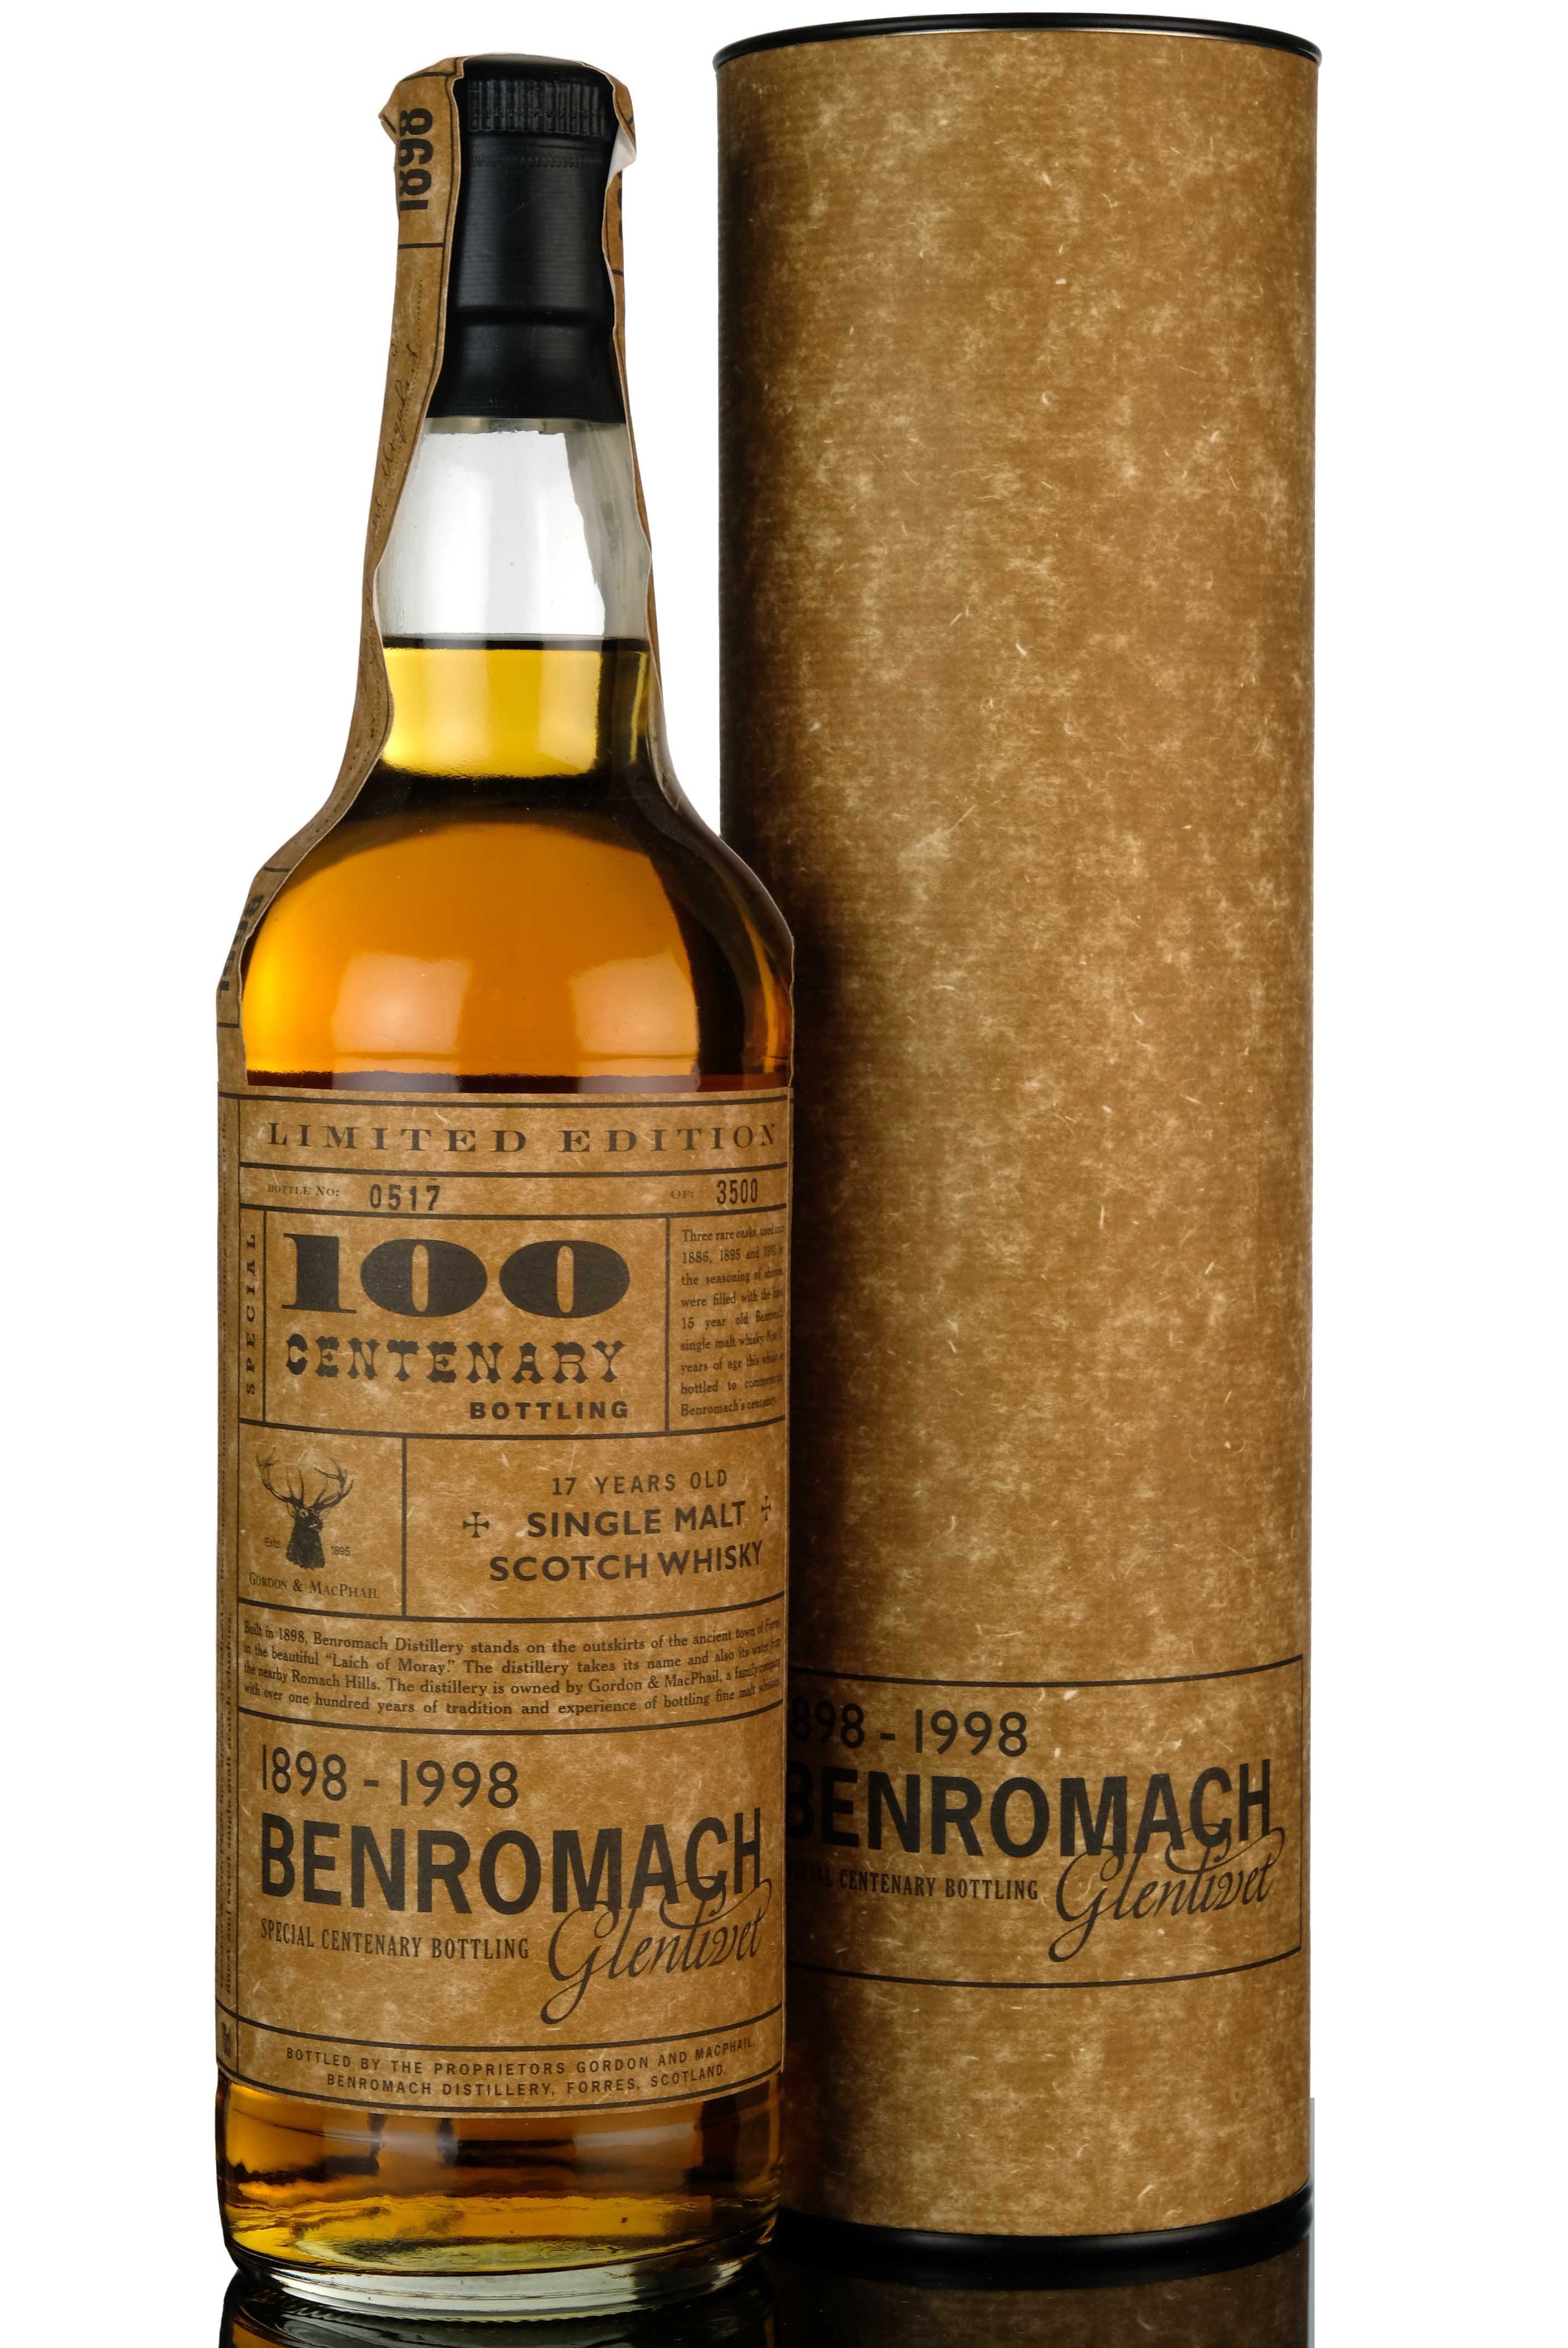 Benromach 17 Year Old - Centenary - 1898-1998